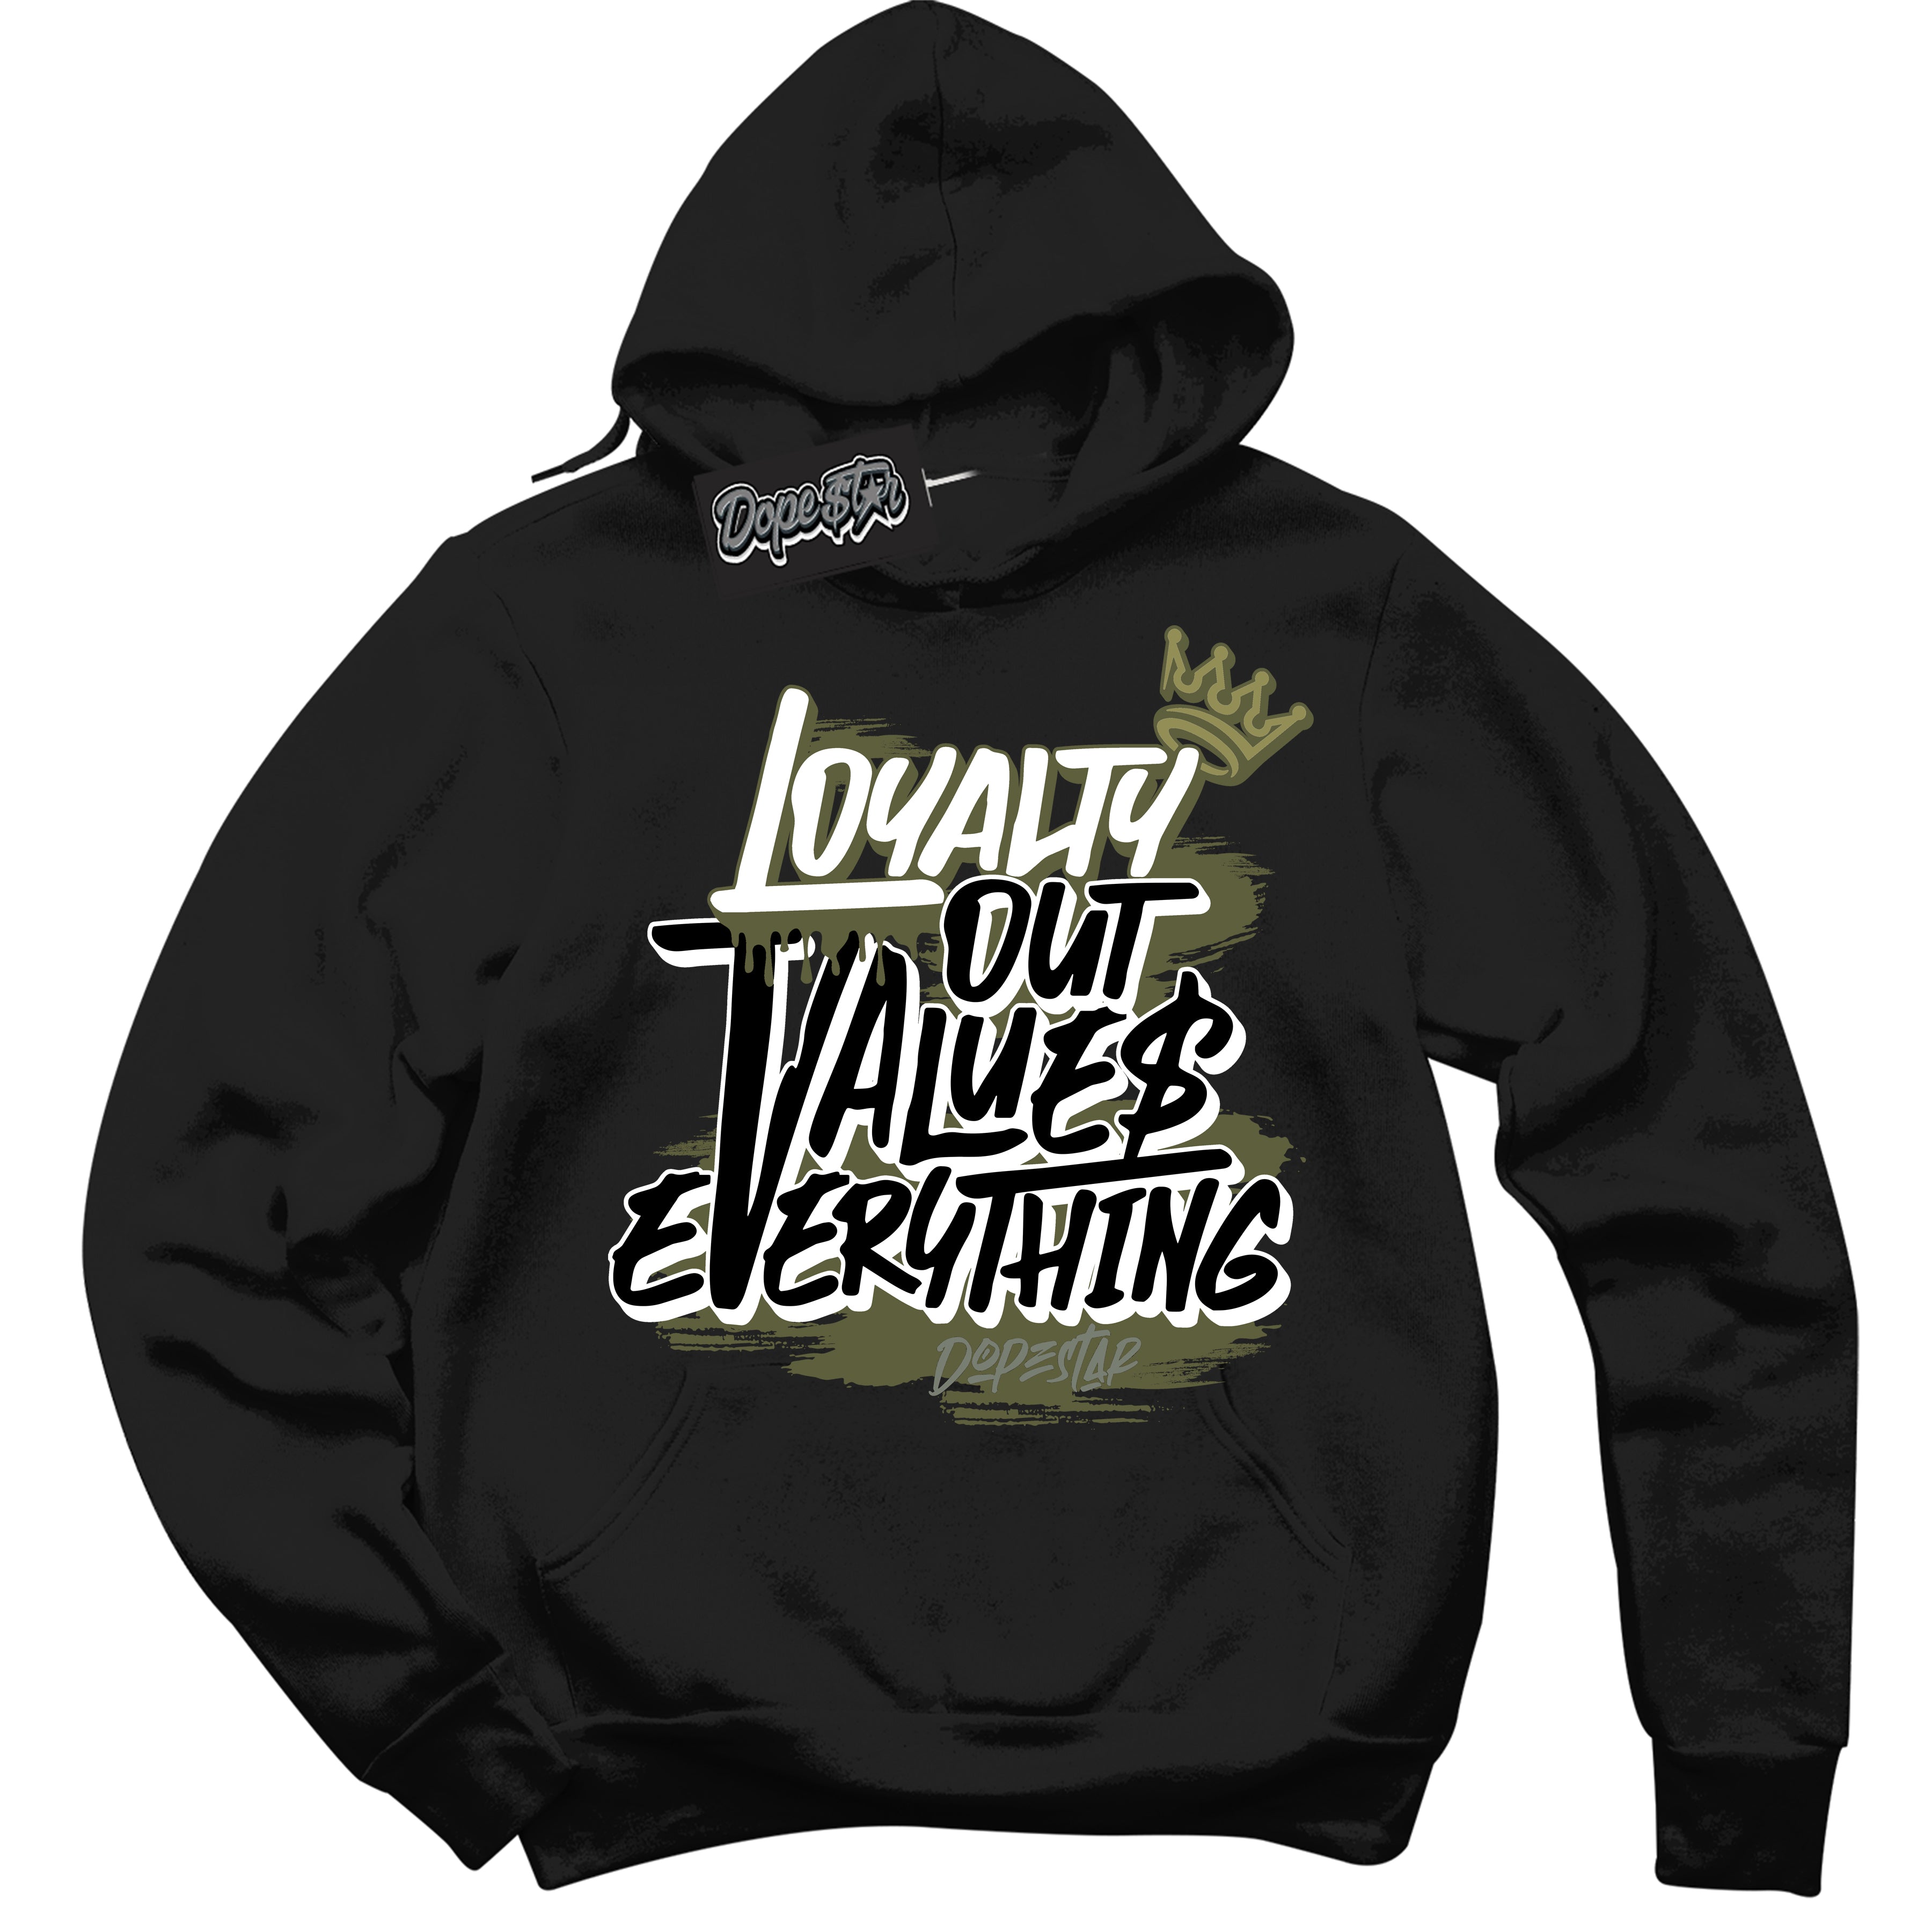 Cool Black Hoodie with “ Loyalty Out Values Everything ”  design that Perfectly Matches Craft Olive 4s Sneakers.